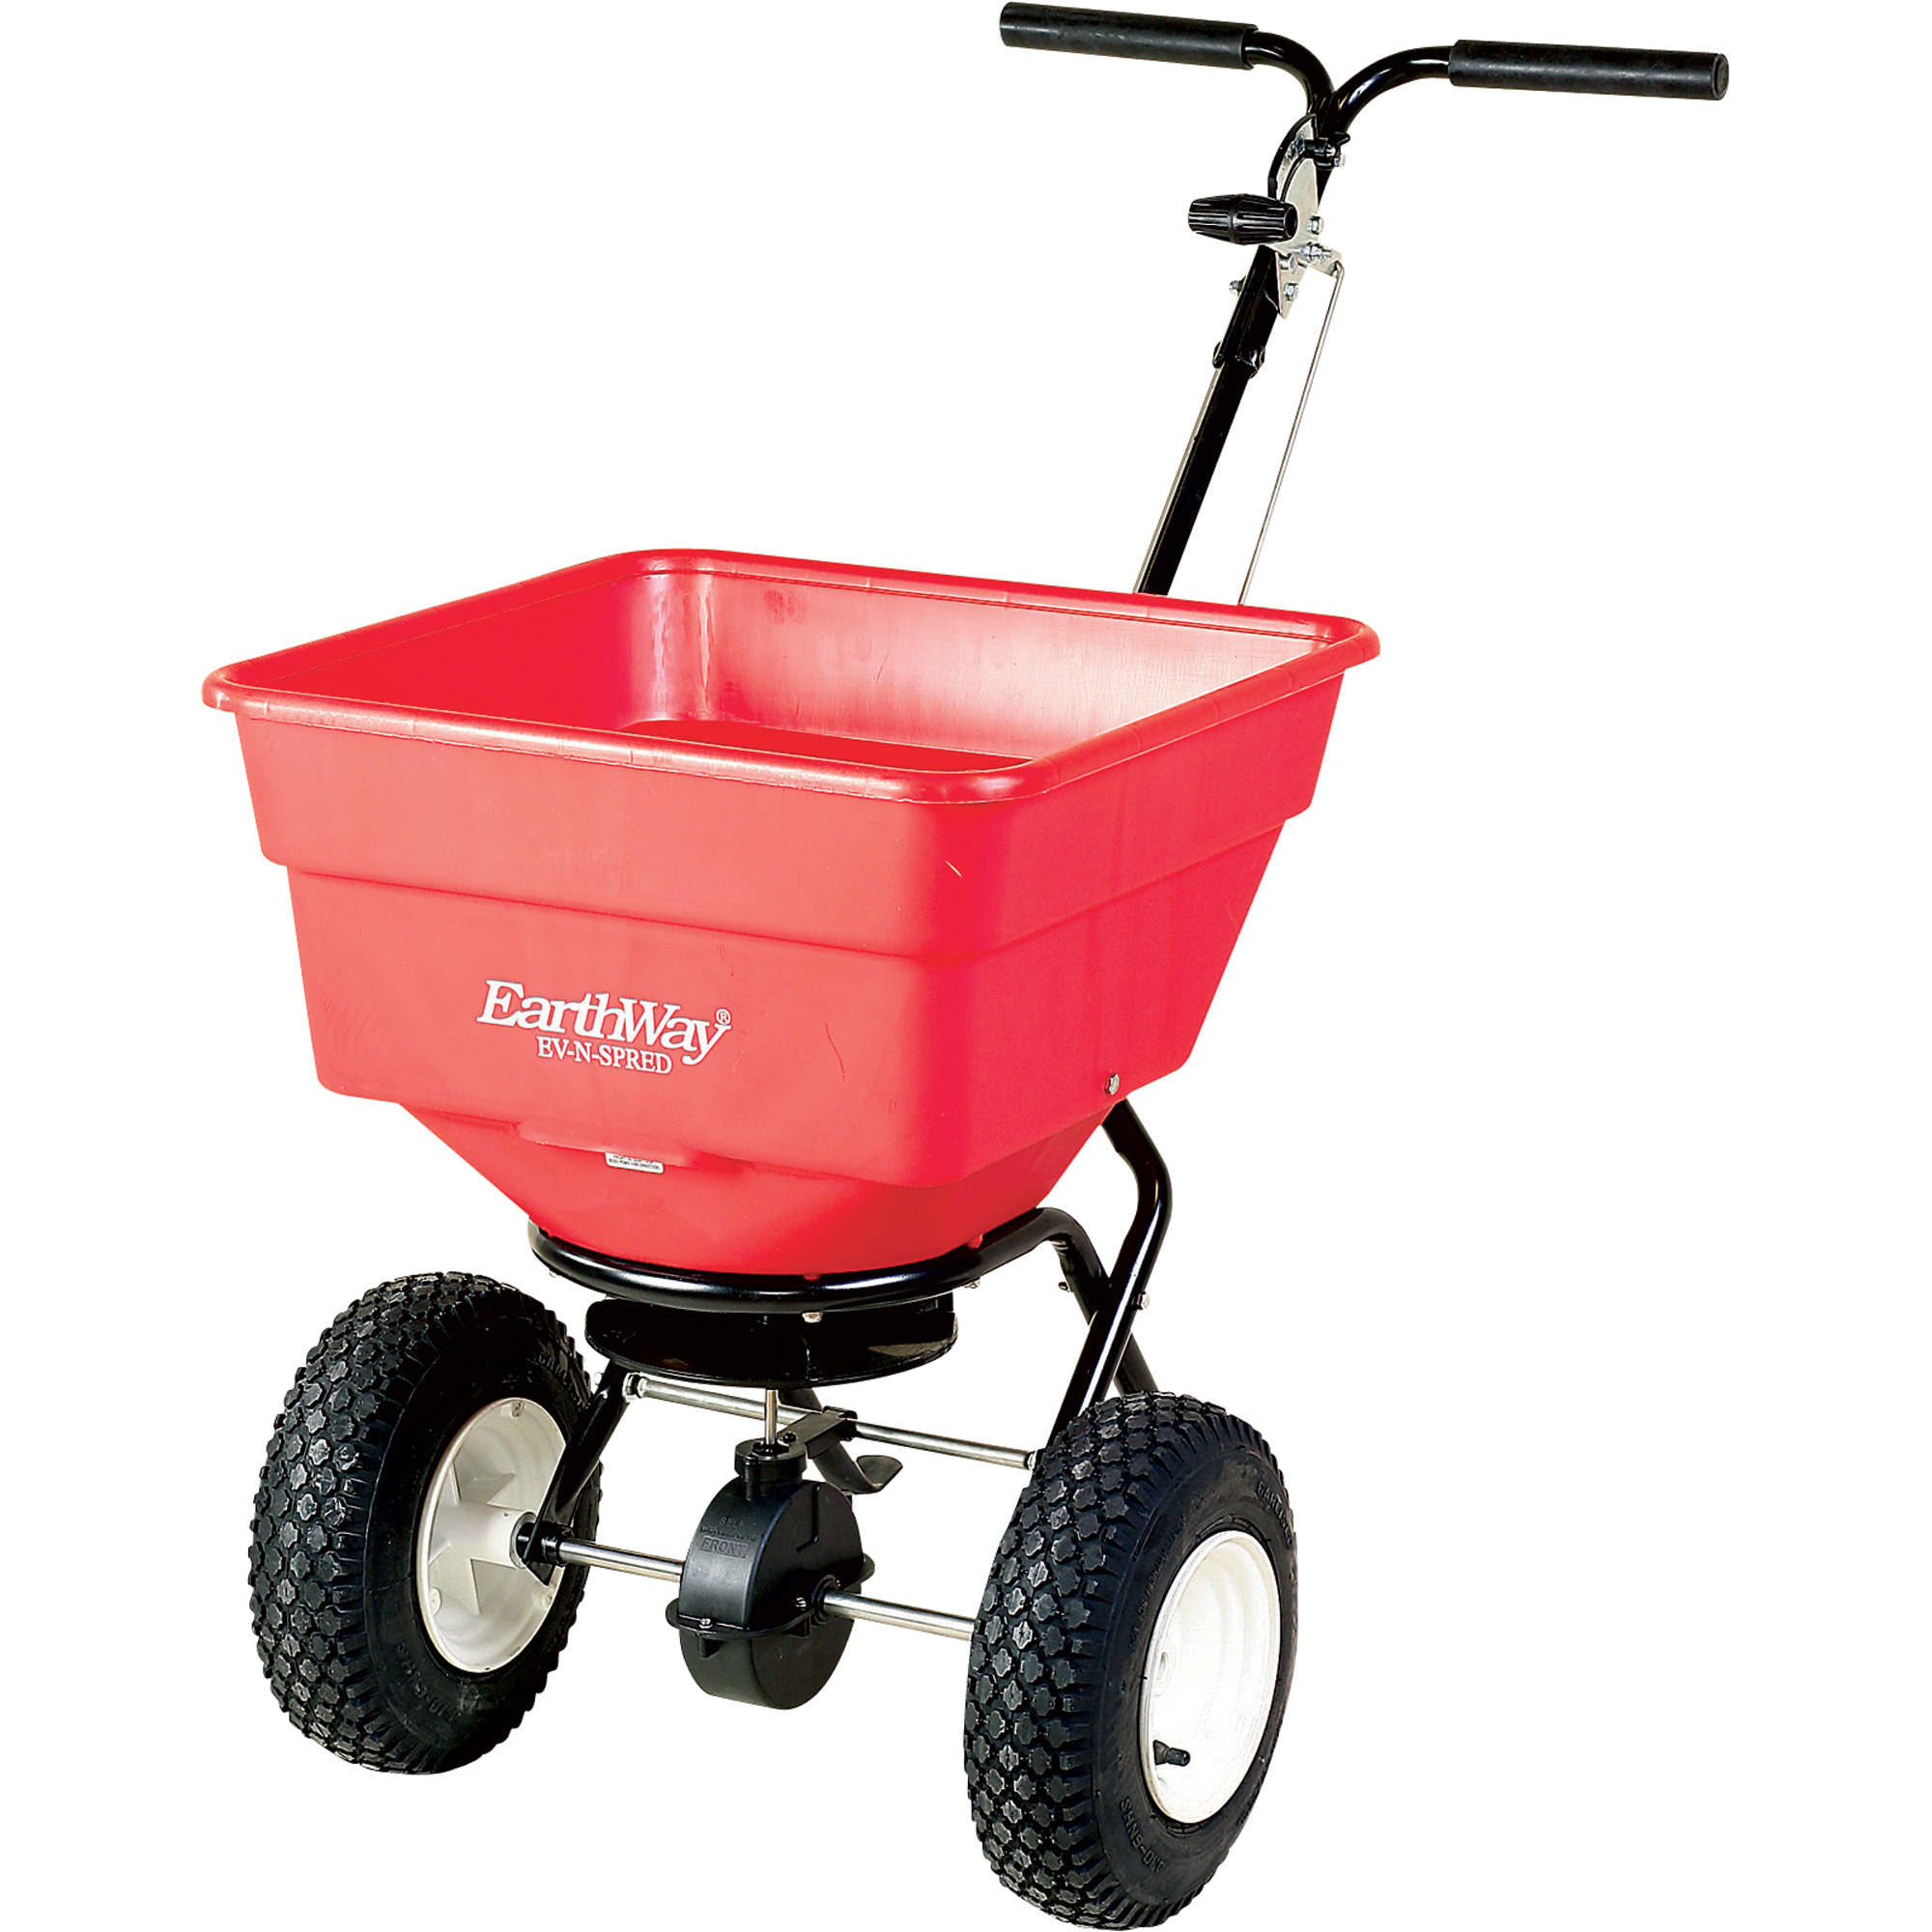 COMMERCIAL RED SPREADER W/PNEUMATIC TIRES, SIDE SHUT